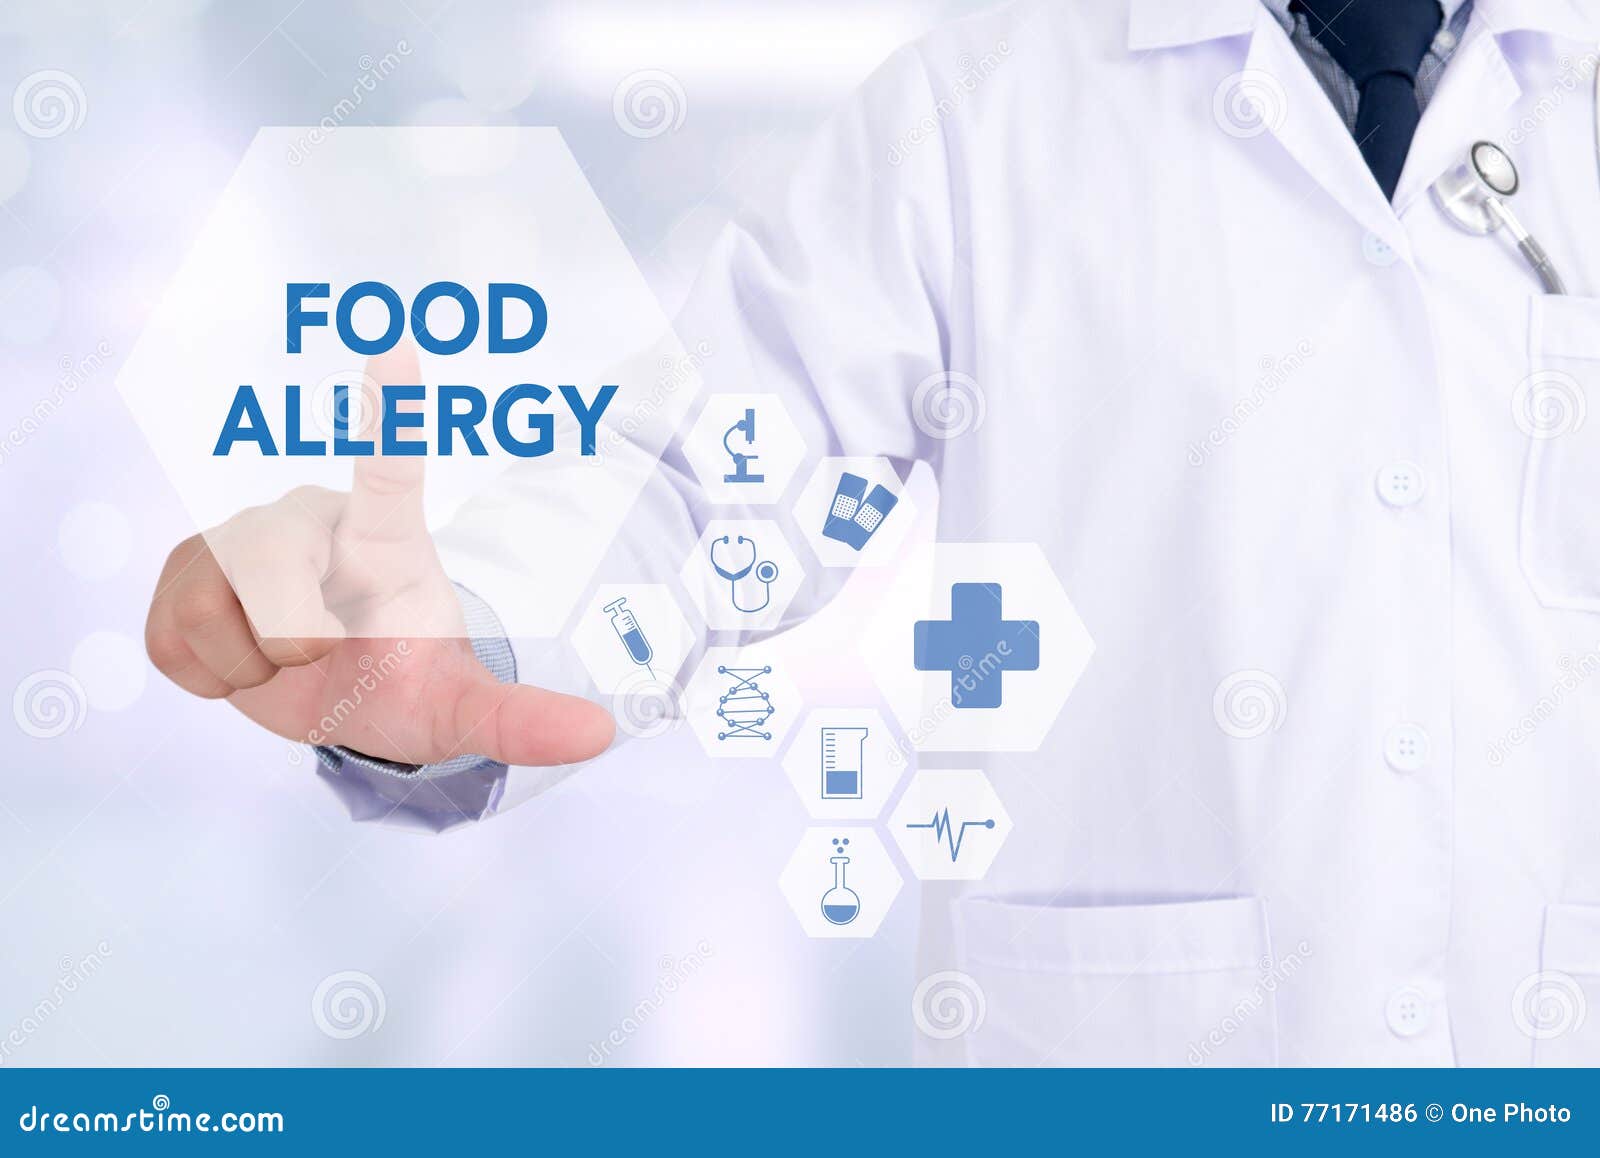 FOOD ALLERGY stock photo. Image of board, graphic, loaf - 77171486